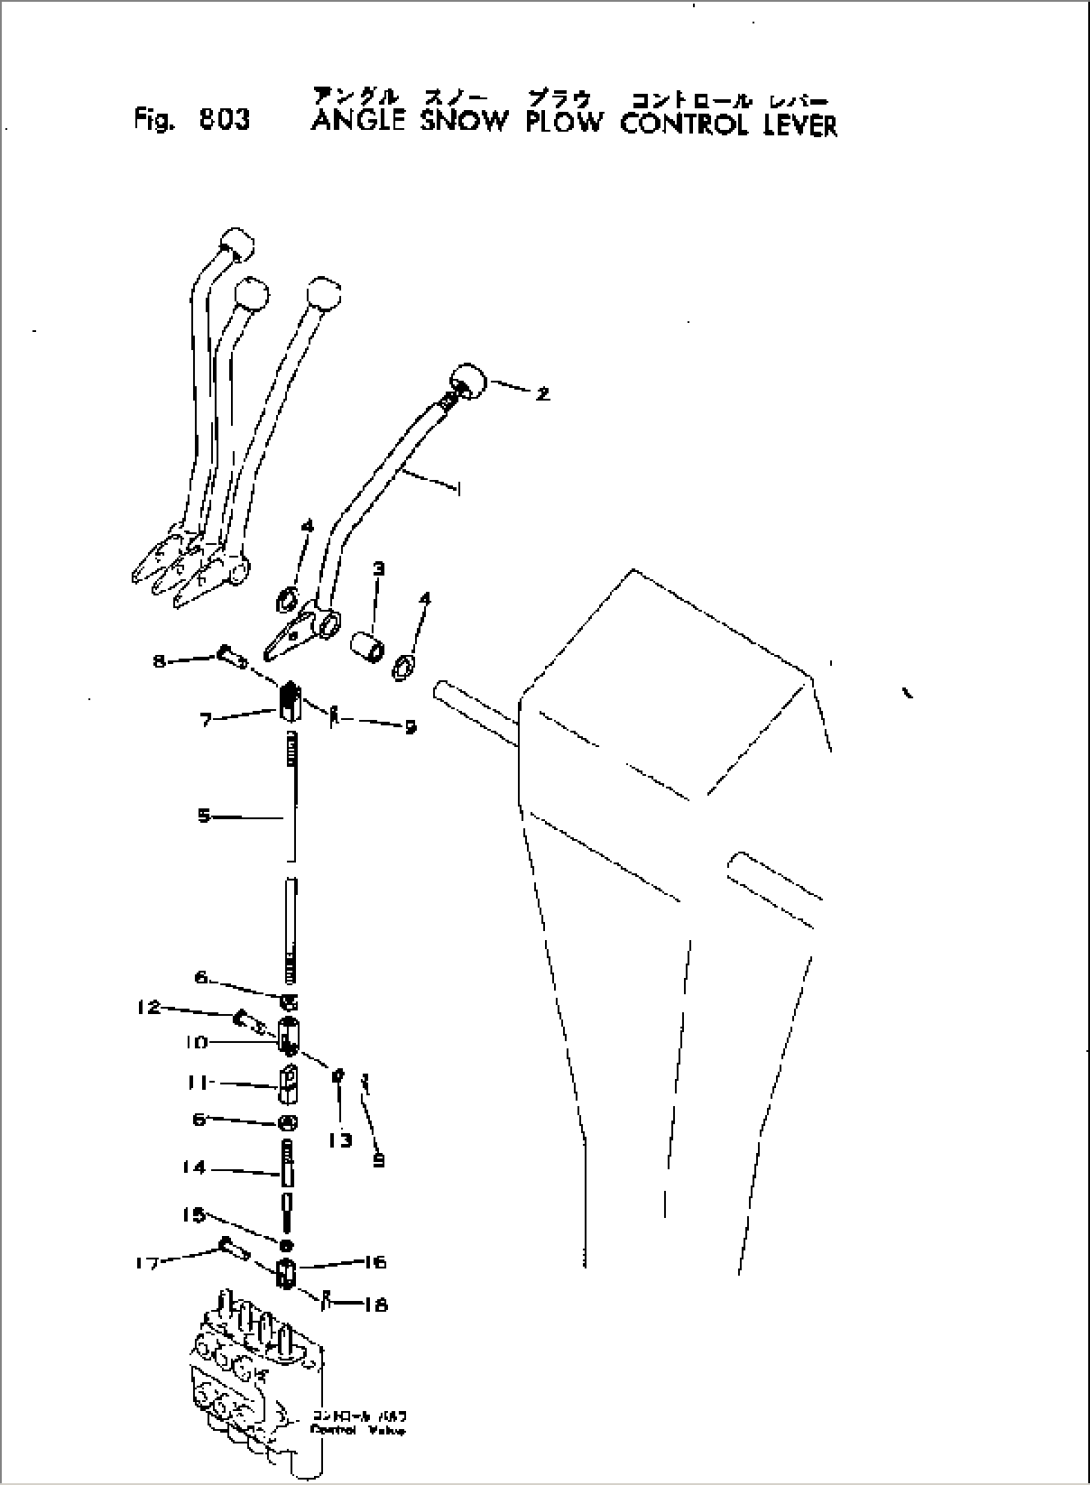 ANGLING SNOW PLOW CONTROL LEVER